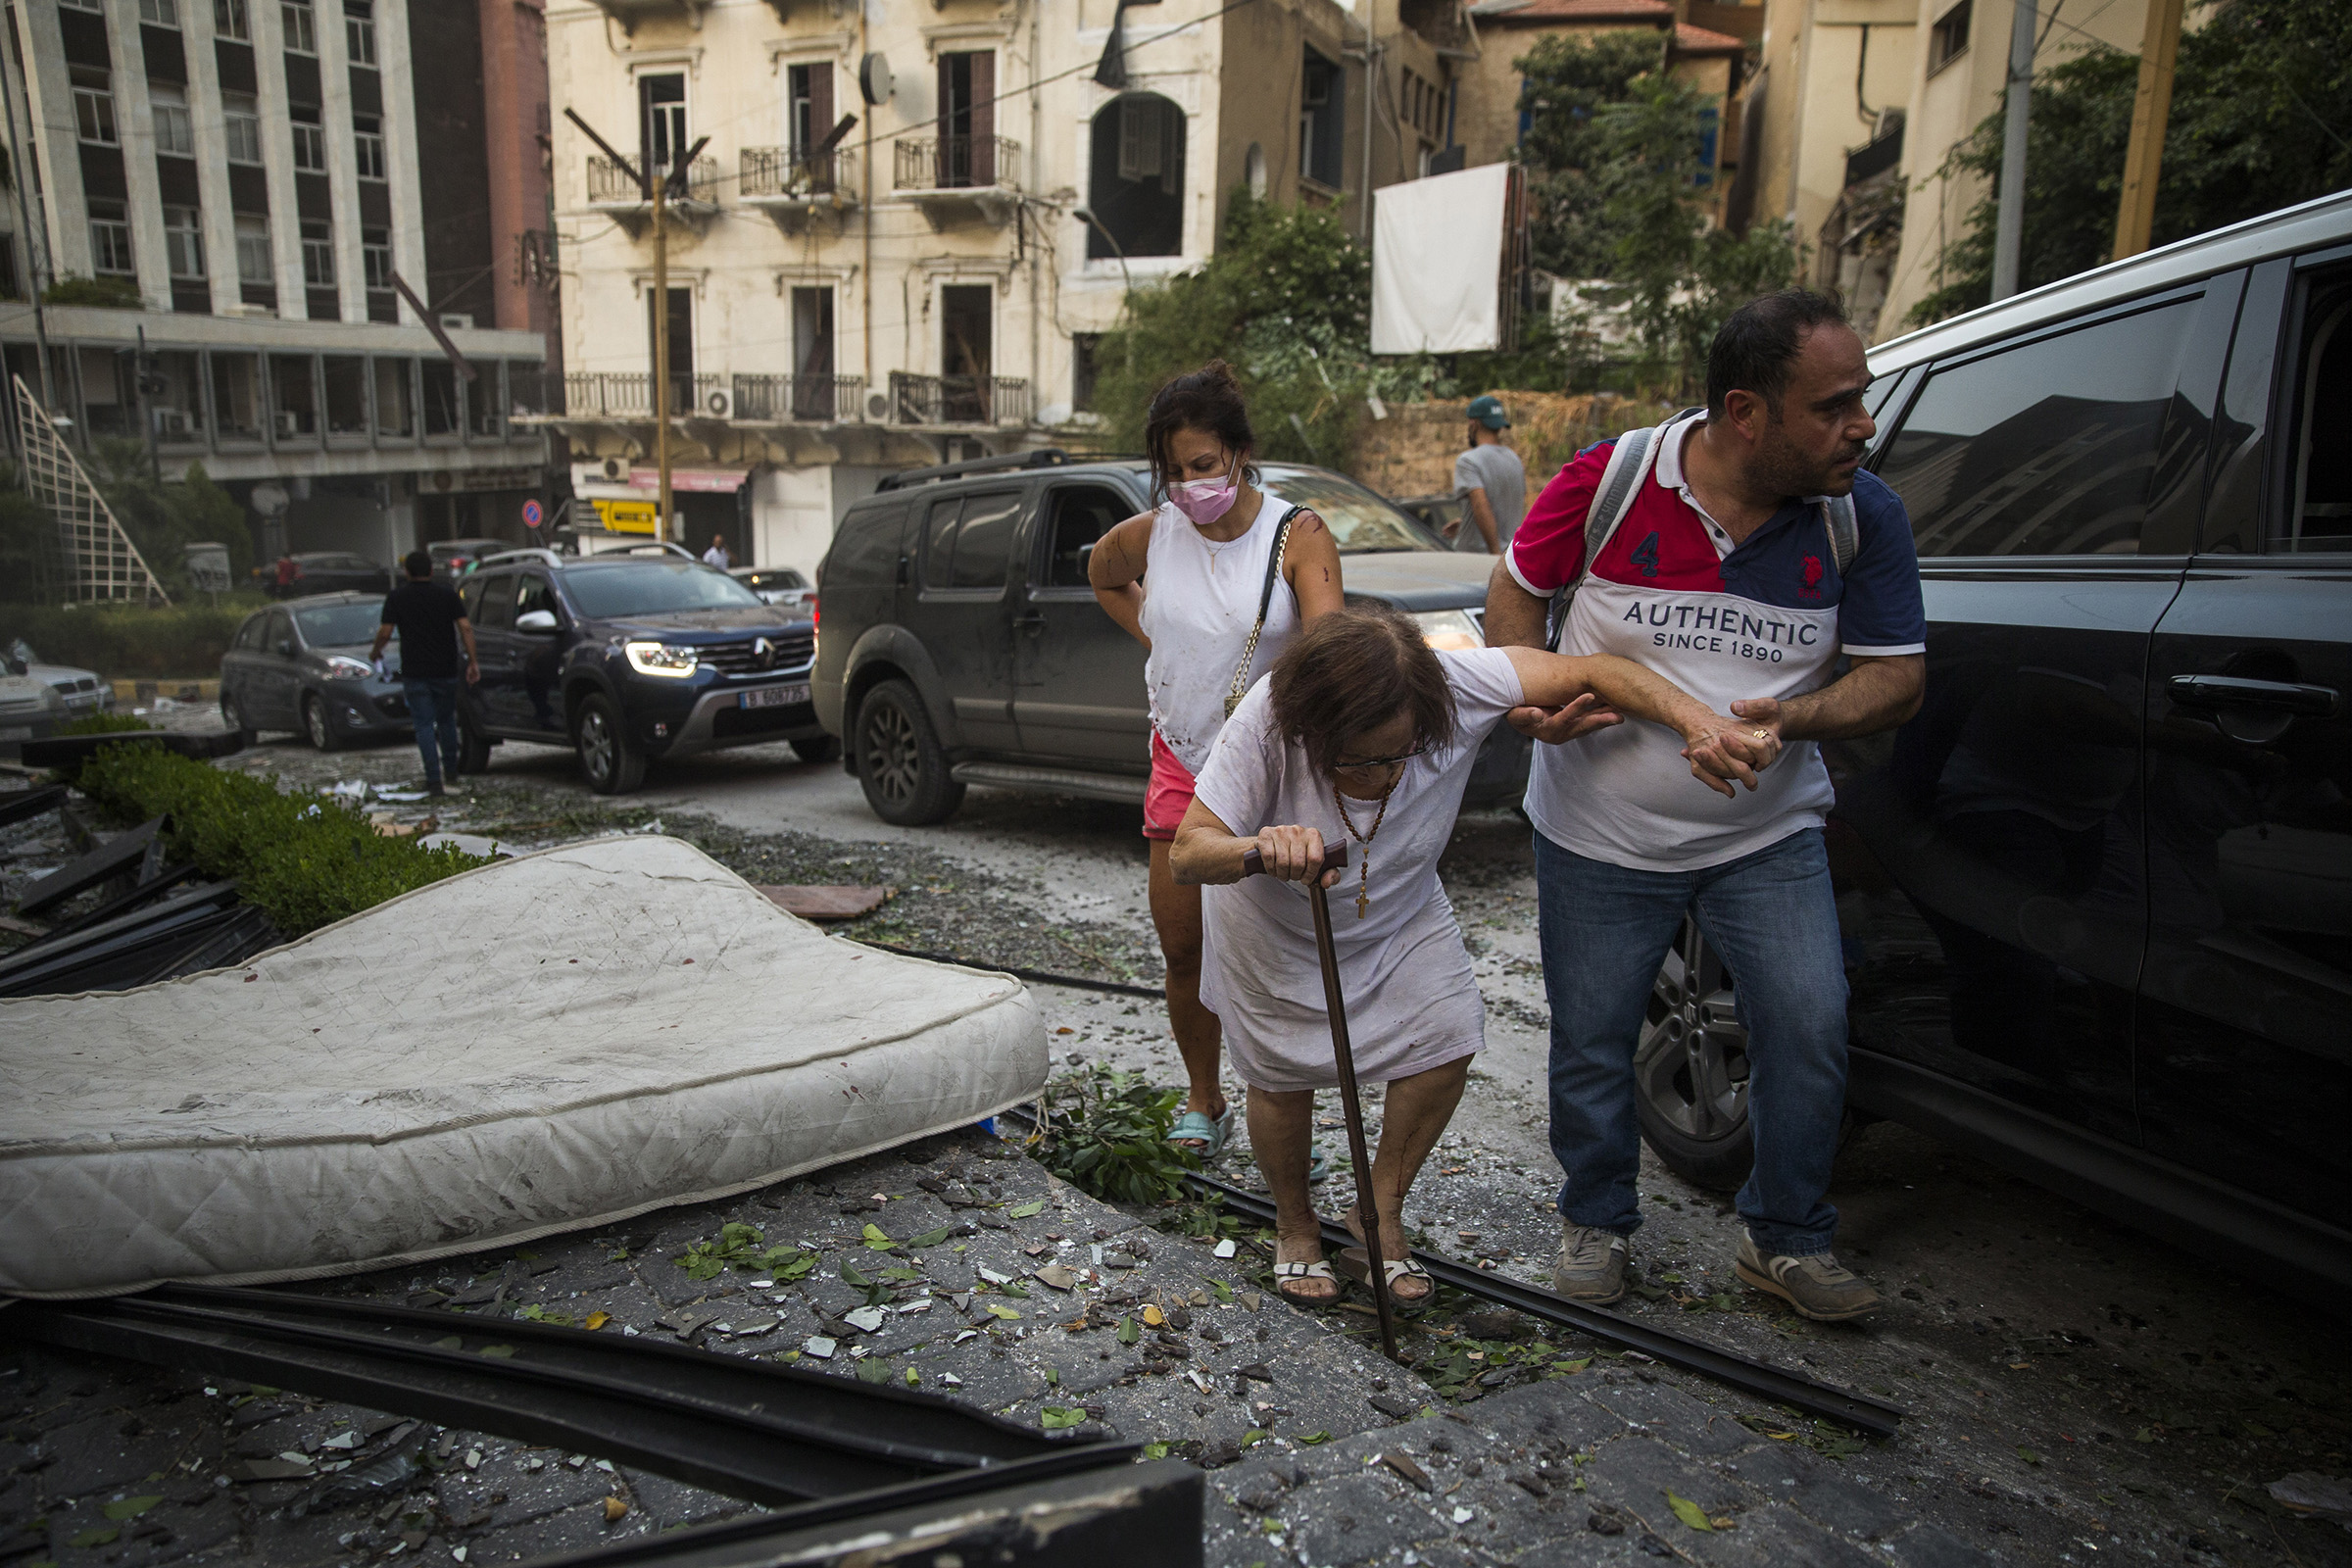 An elderly woman is helped while walking through debris after the explosion. (Daniel Carde—Getty Images)